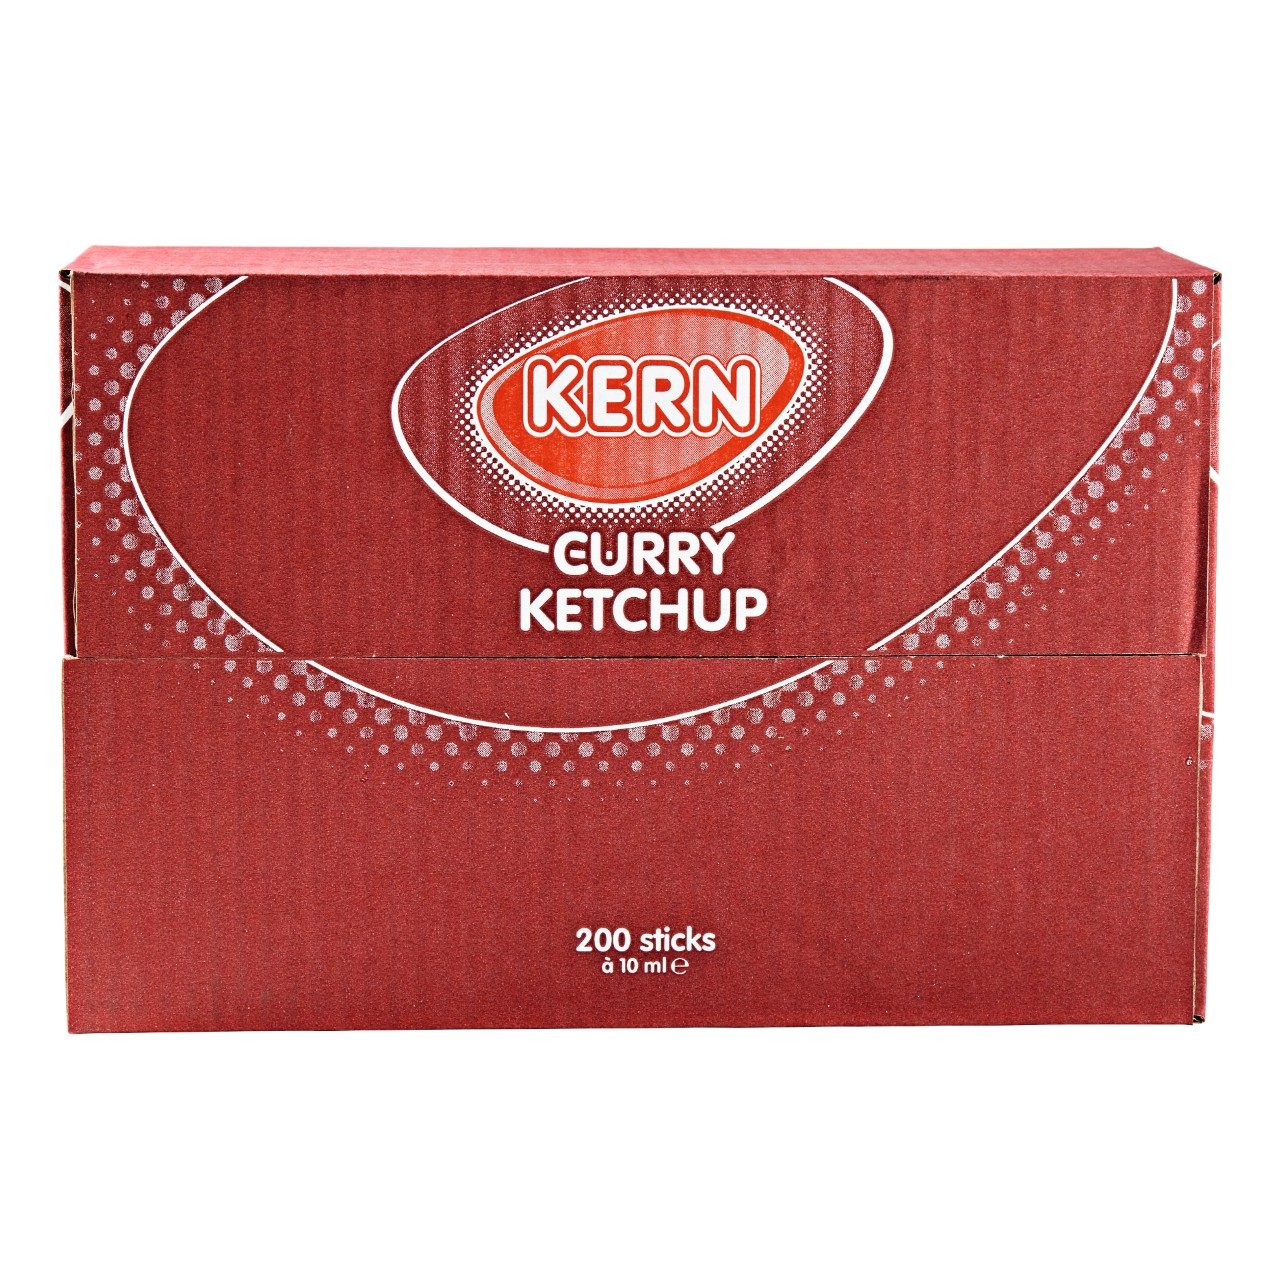 Curry ketchup sachets